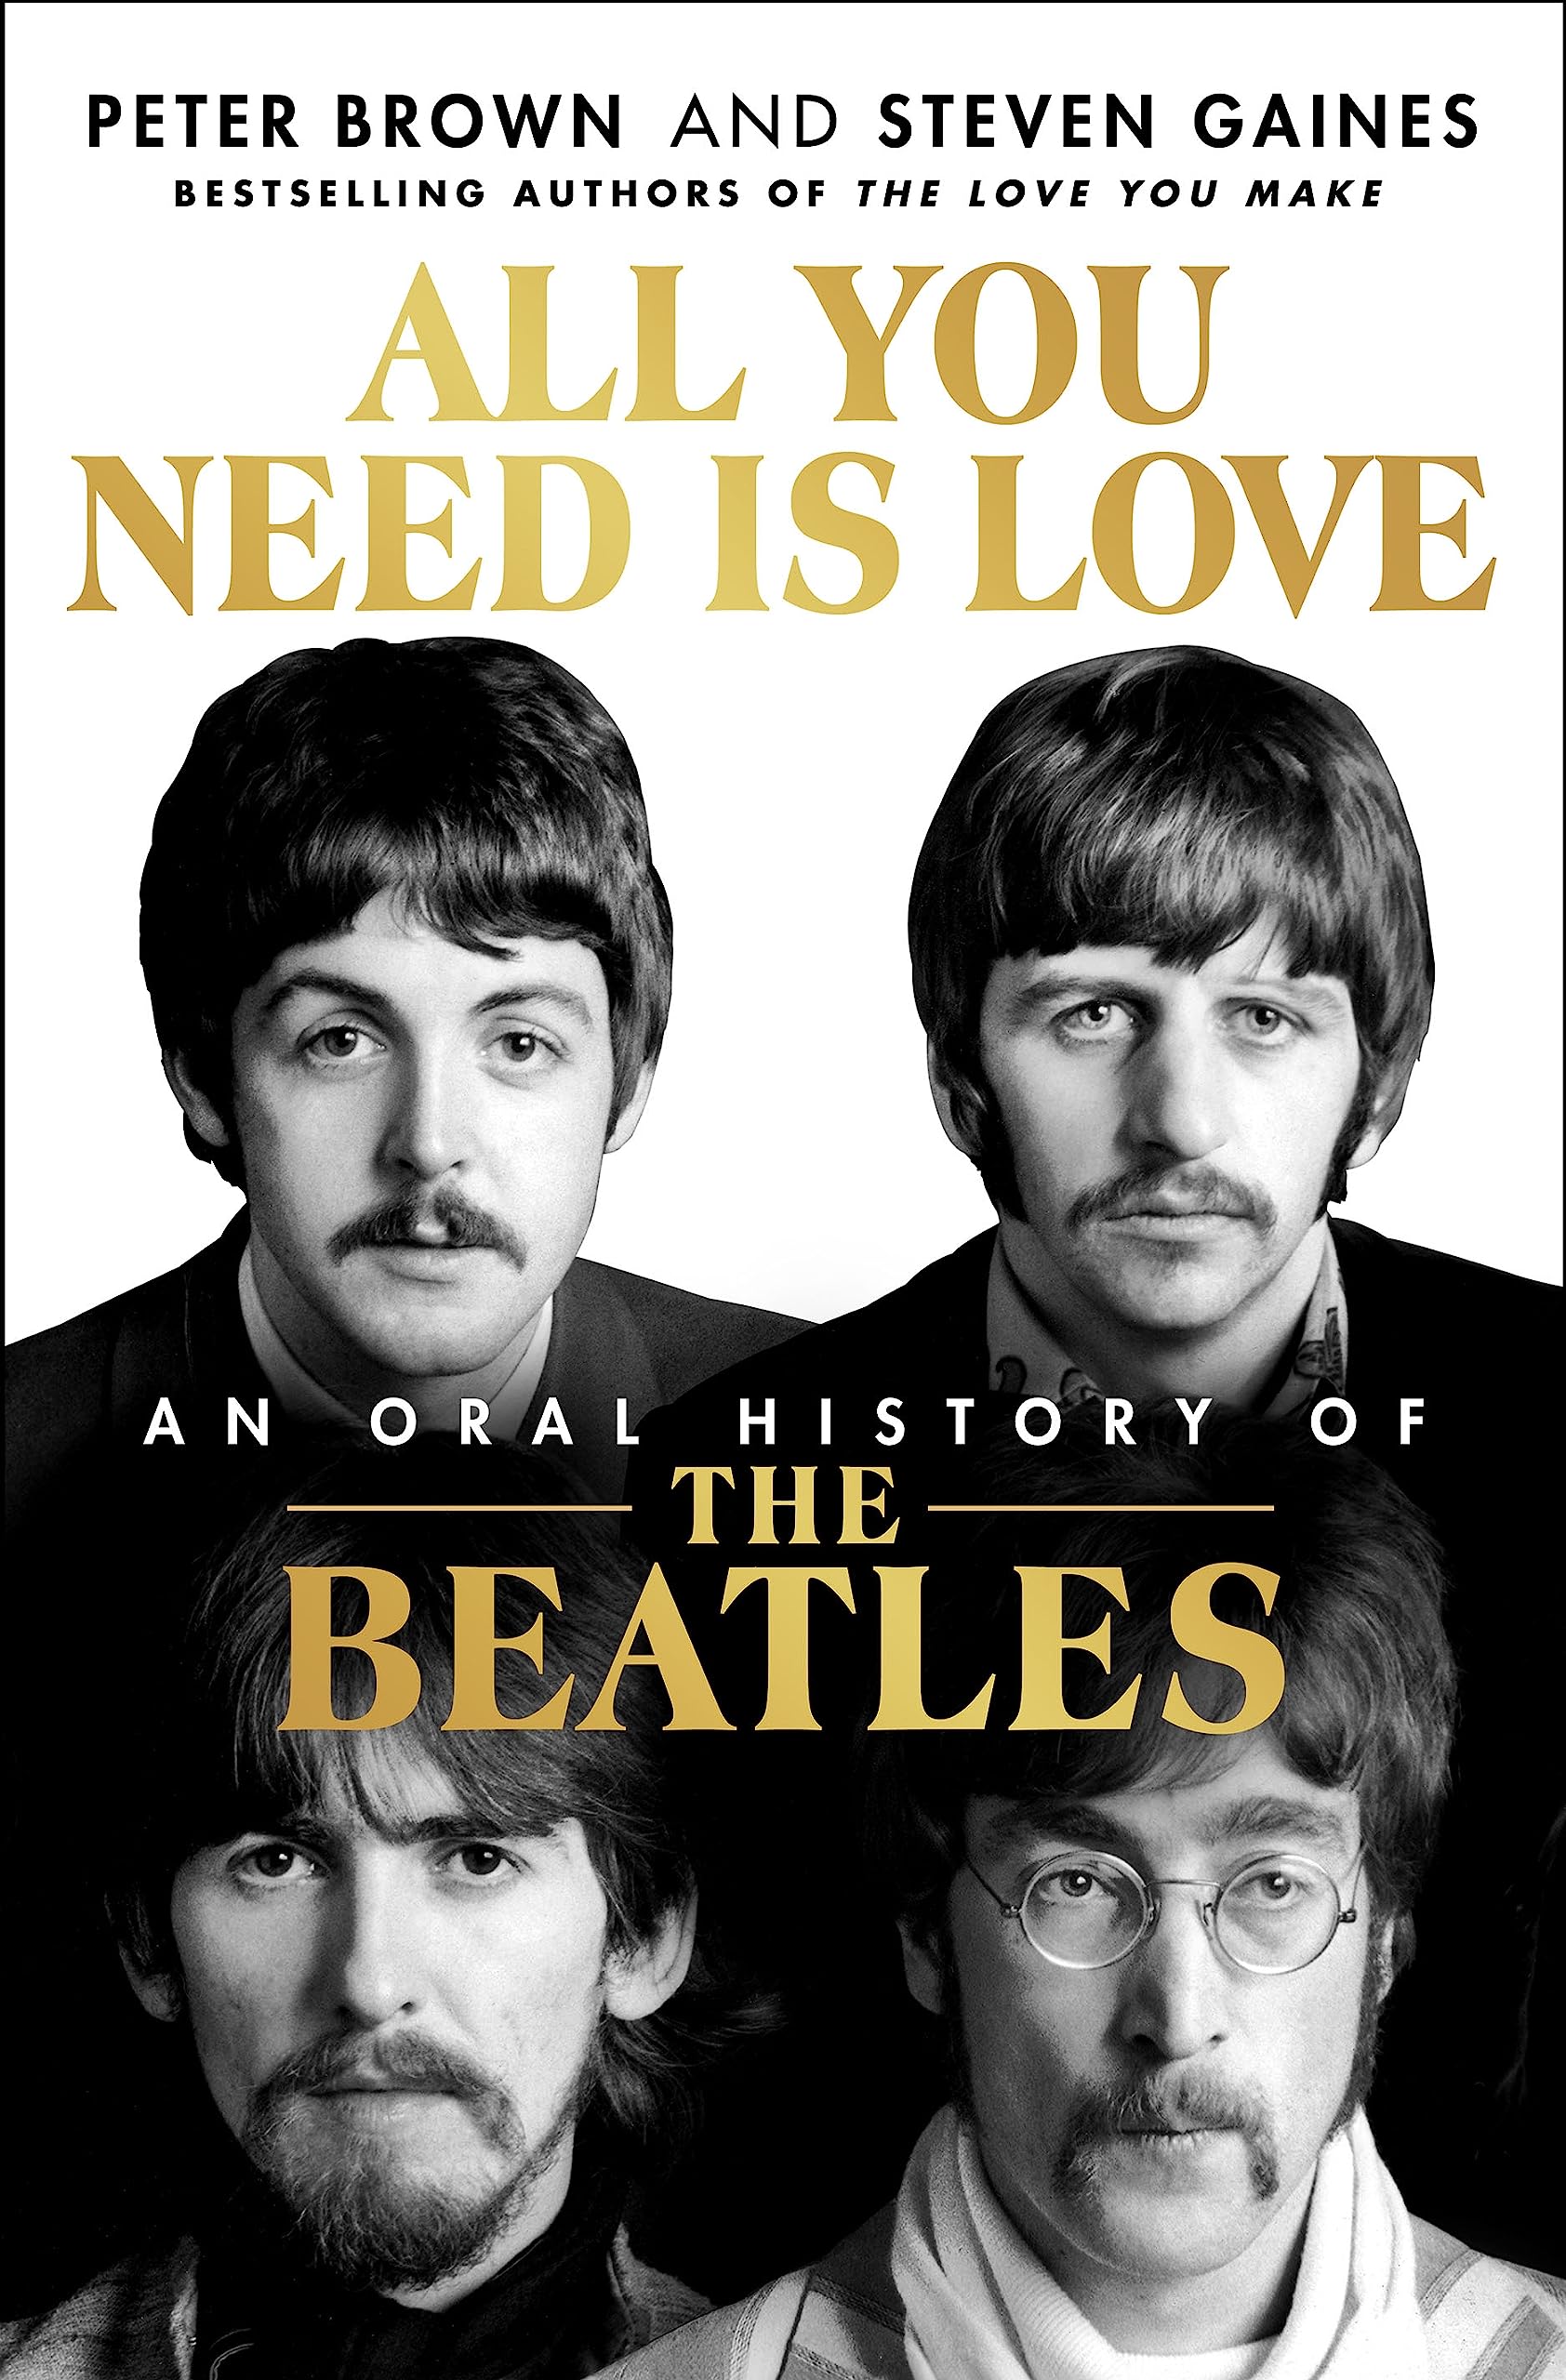 All You Need Is Love: An Oral History of The Beatles